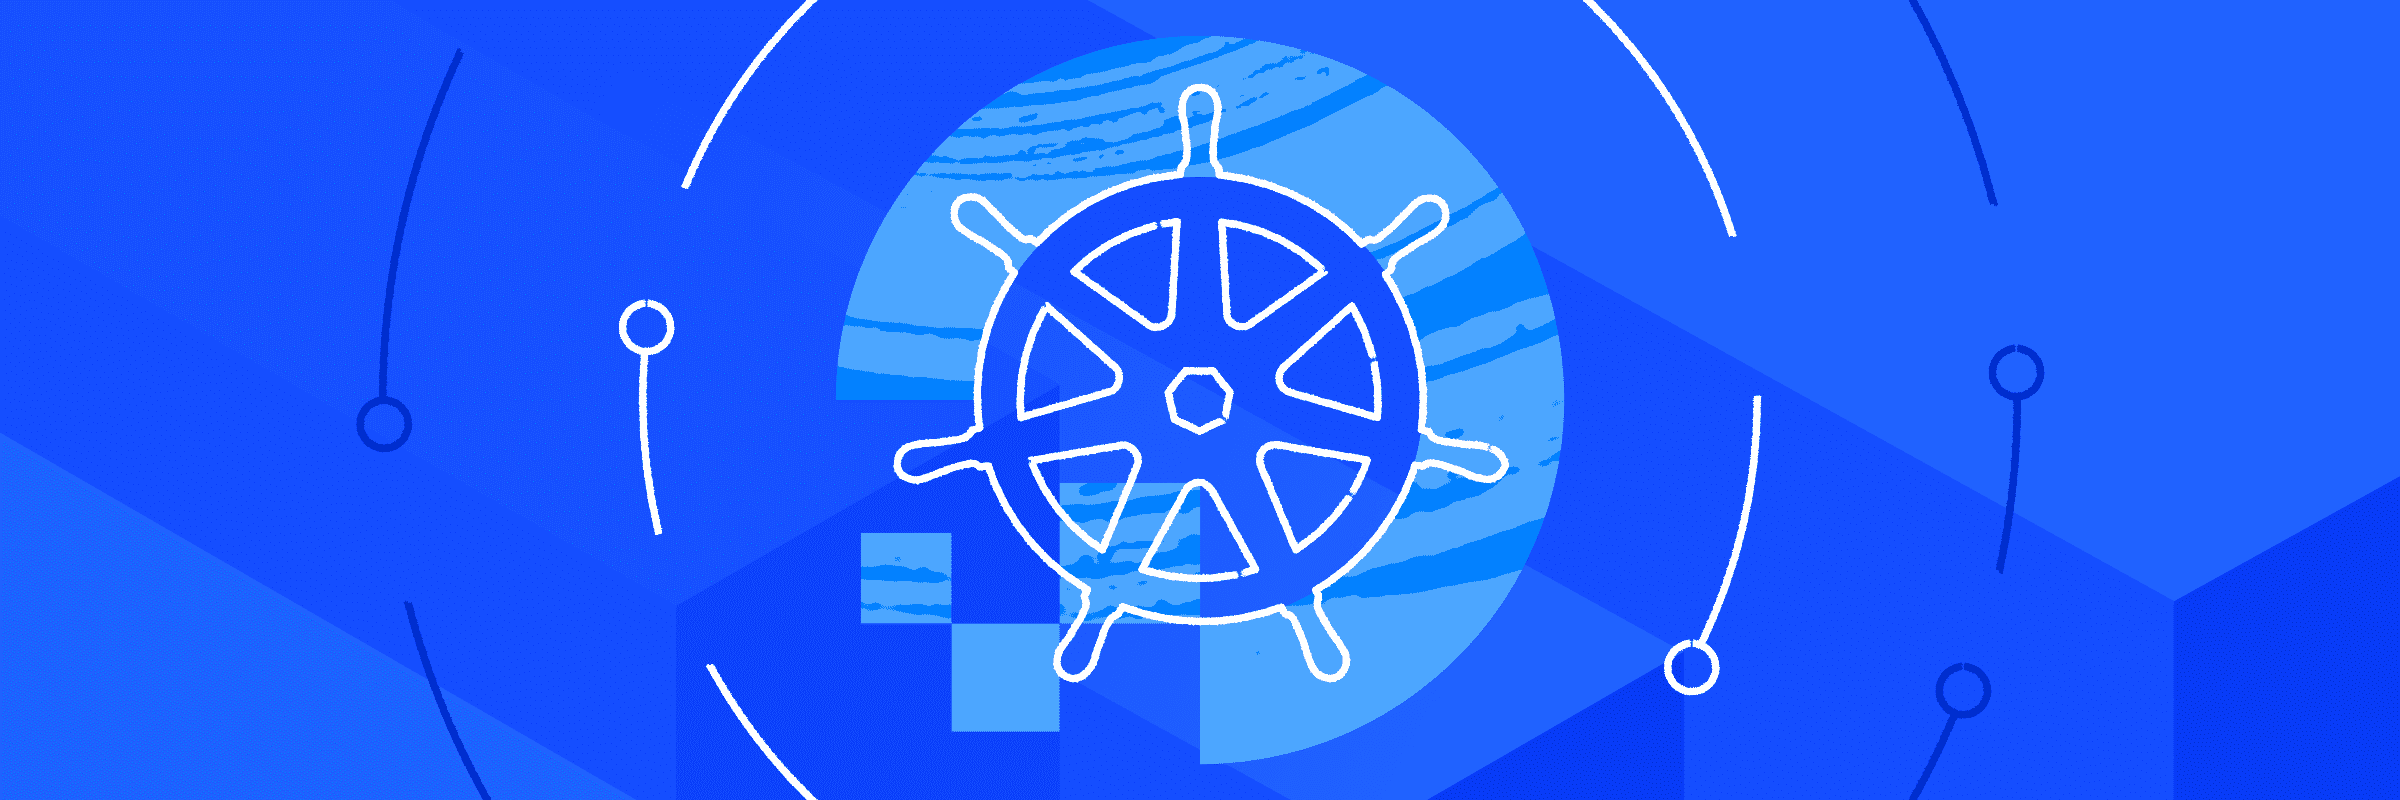 Learn to Provision Kubernetes Cluster with Kubeadm